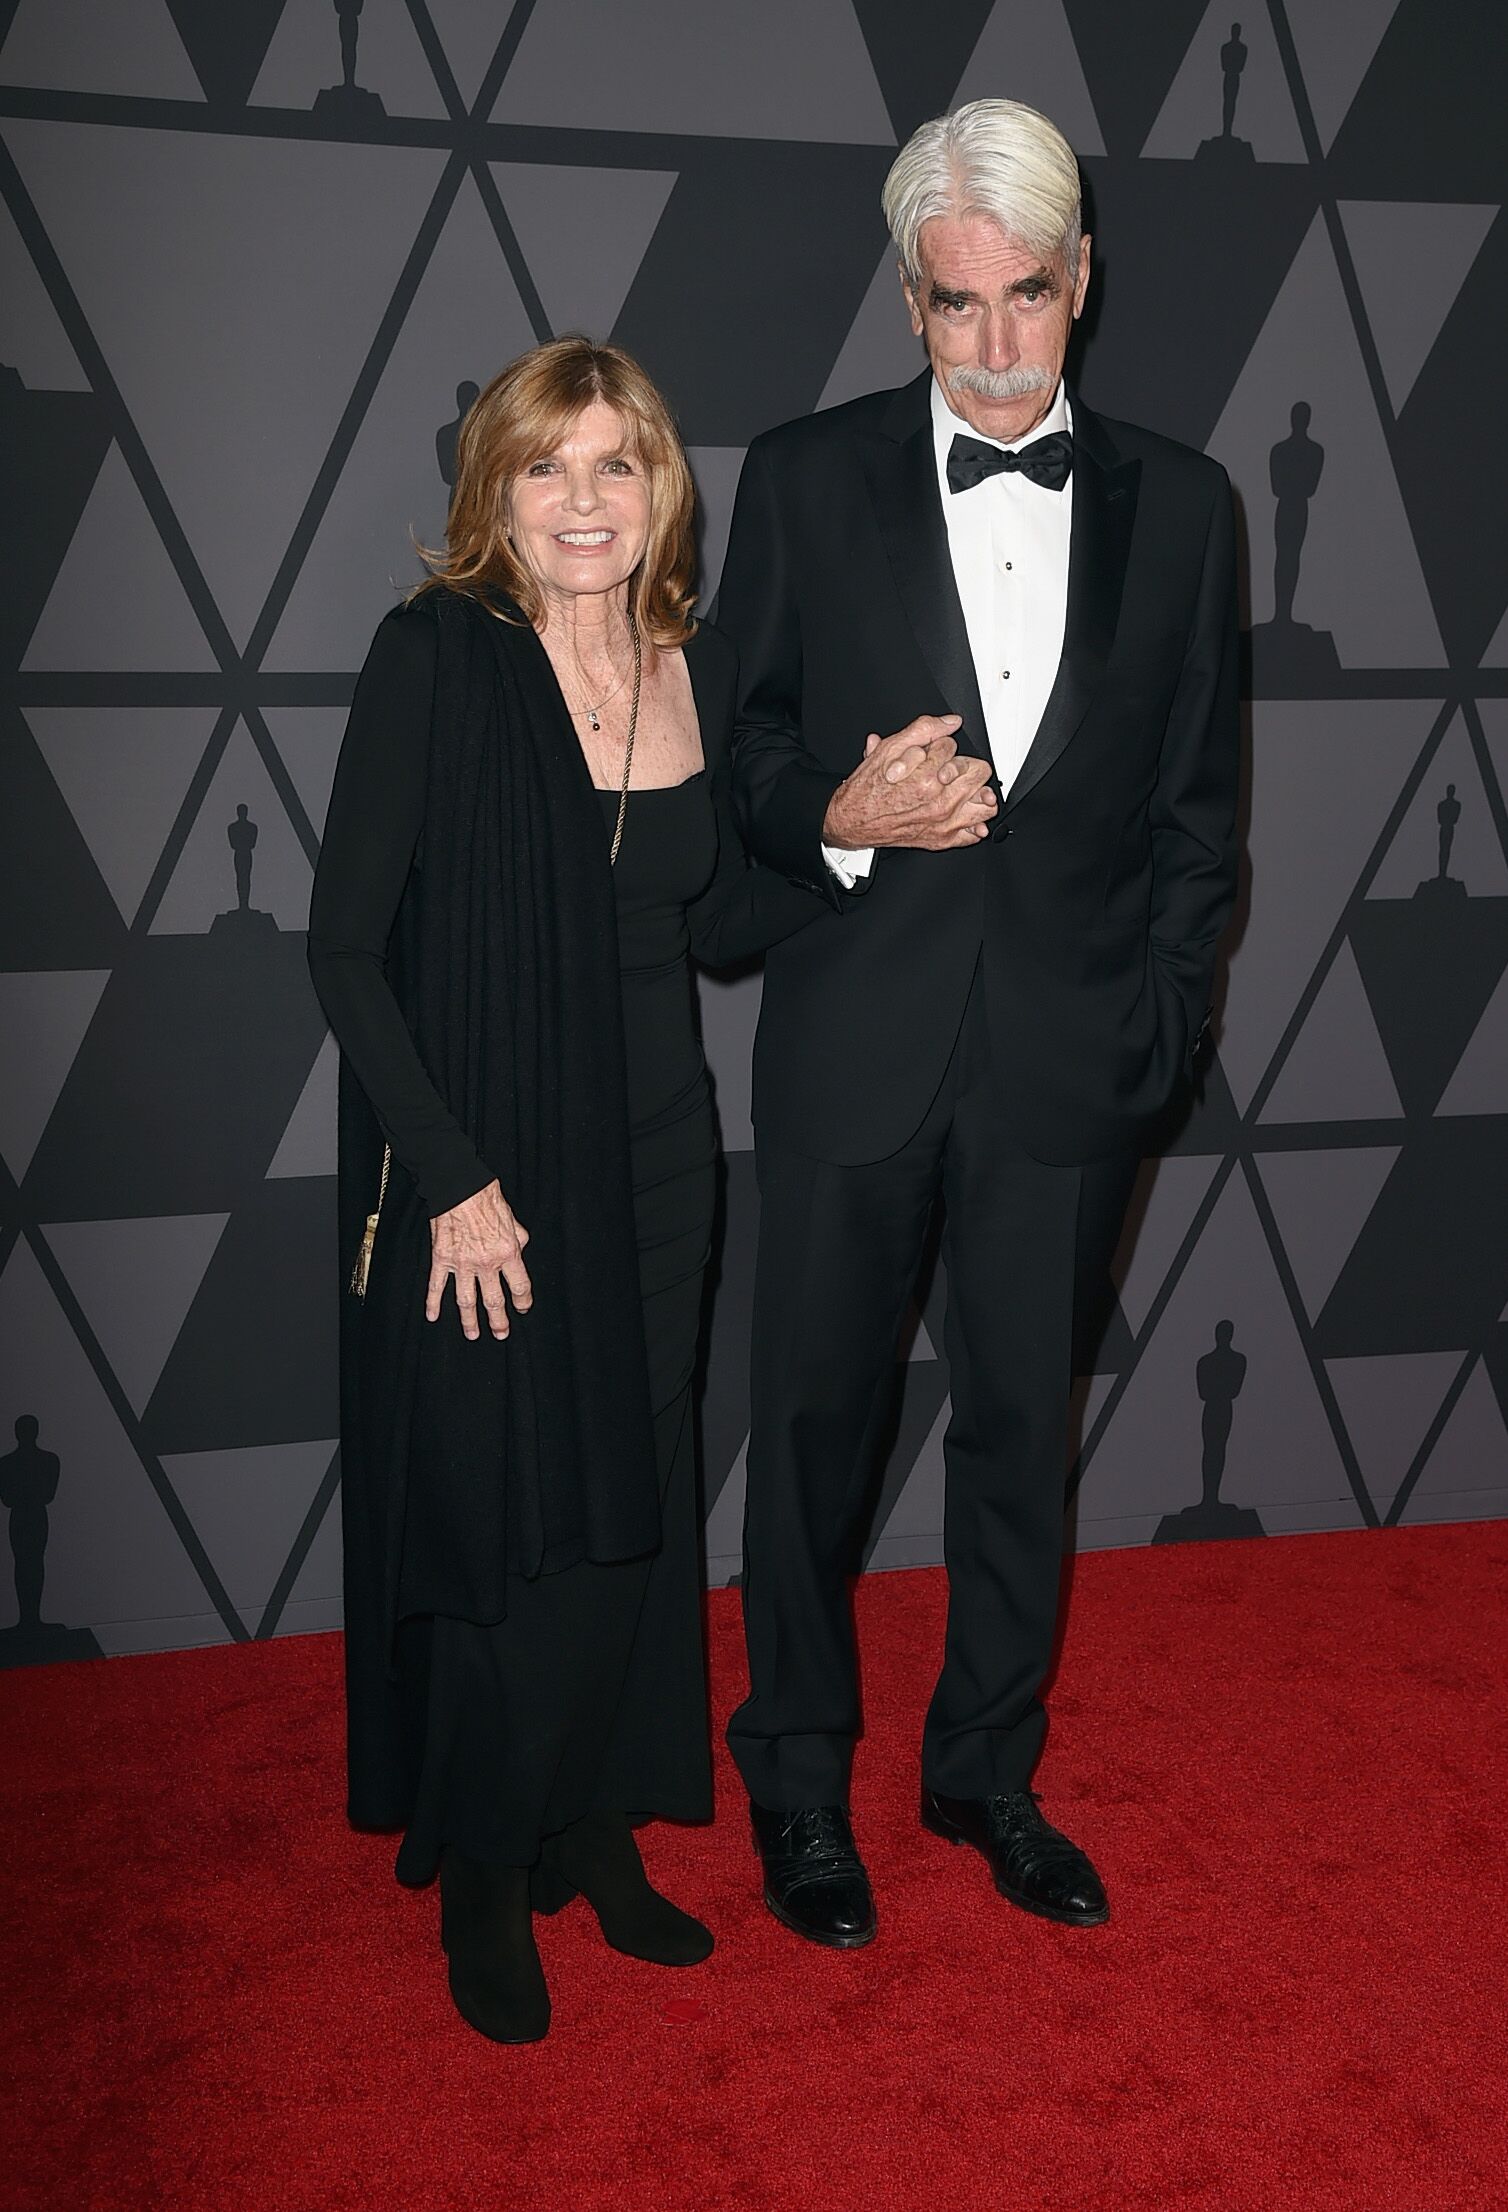  Katharine Ross and Sam Elliott at the Academy of Motion Picture Arts and Sciences' 9th Annual Governors Awards | Source: Getty Images